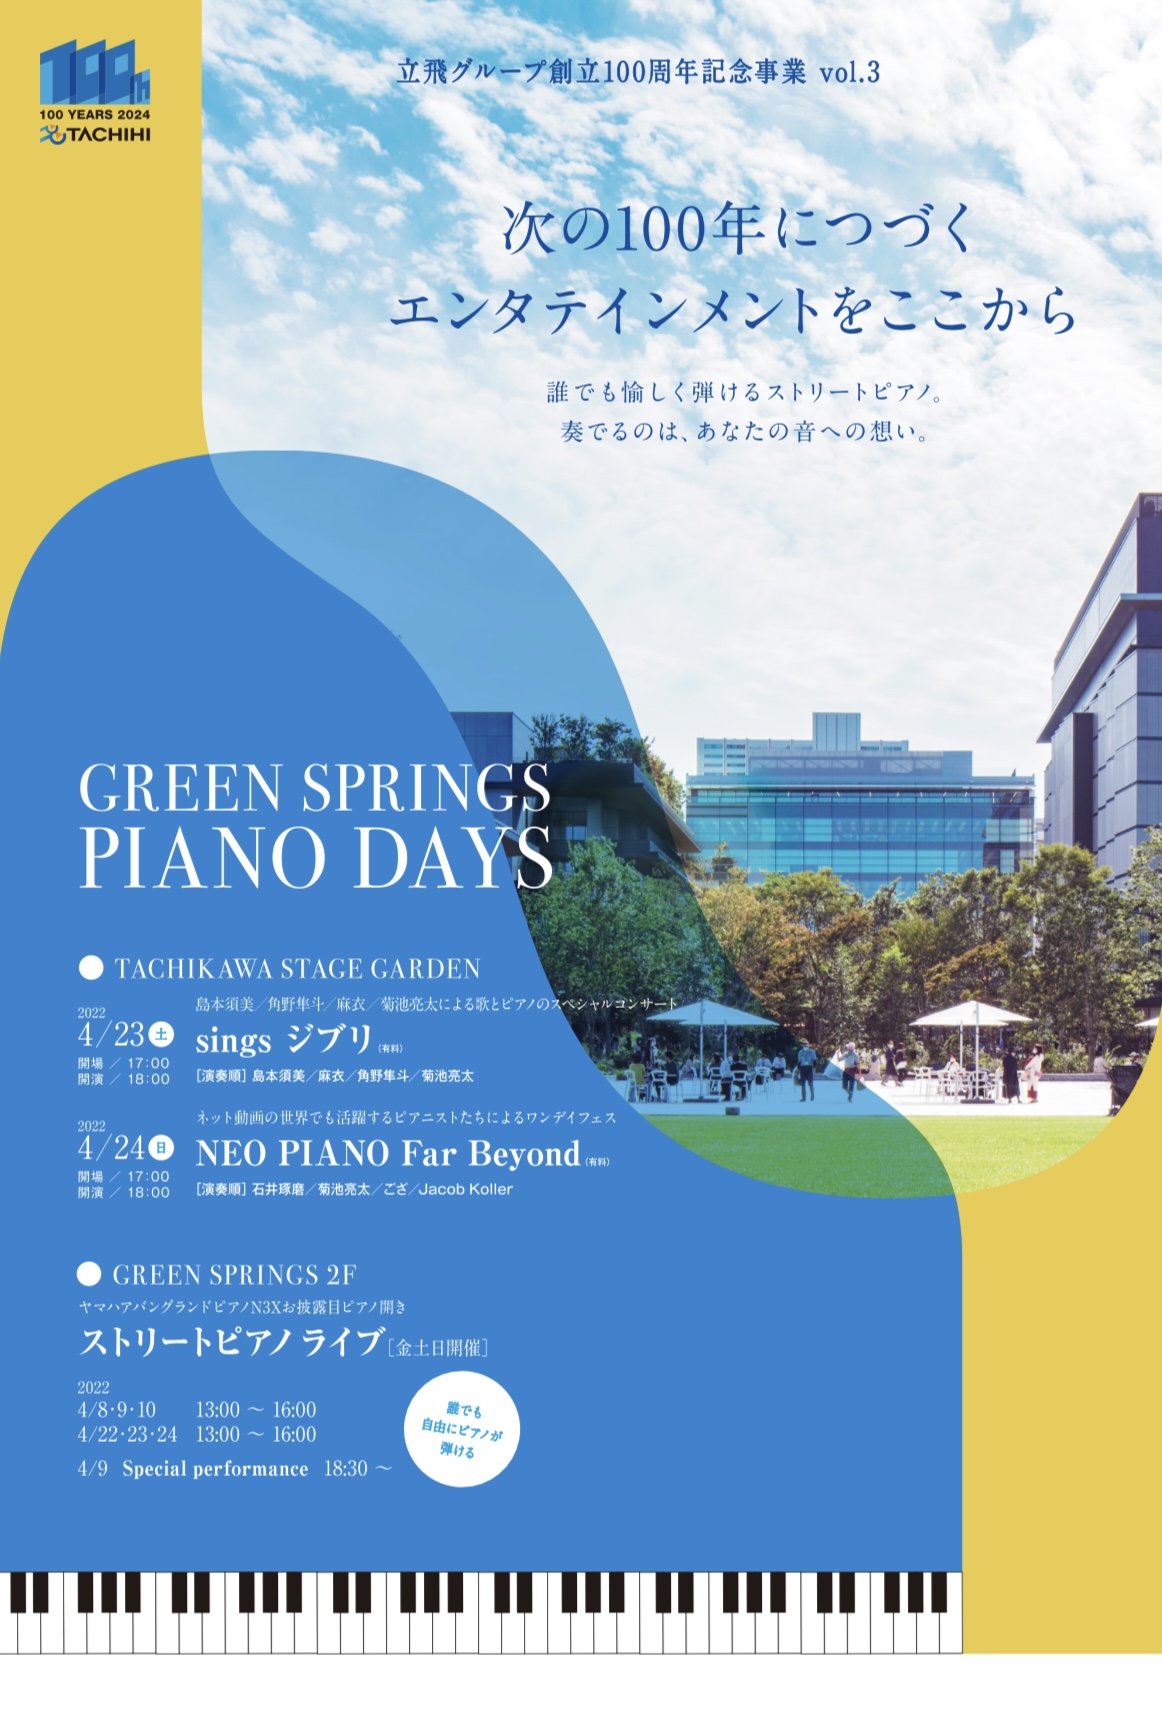 2022.4. 9-10 THE PIANO DAYS